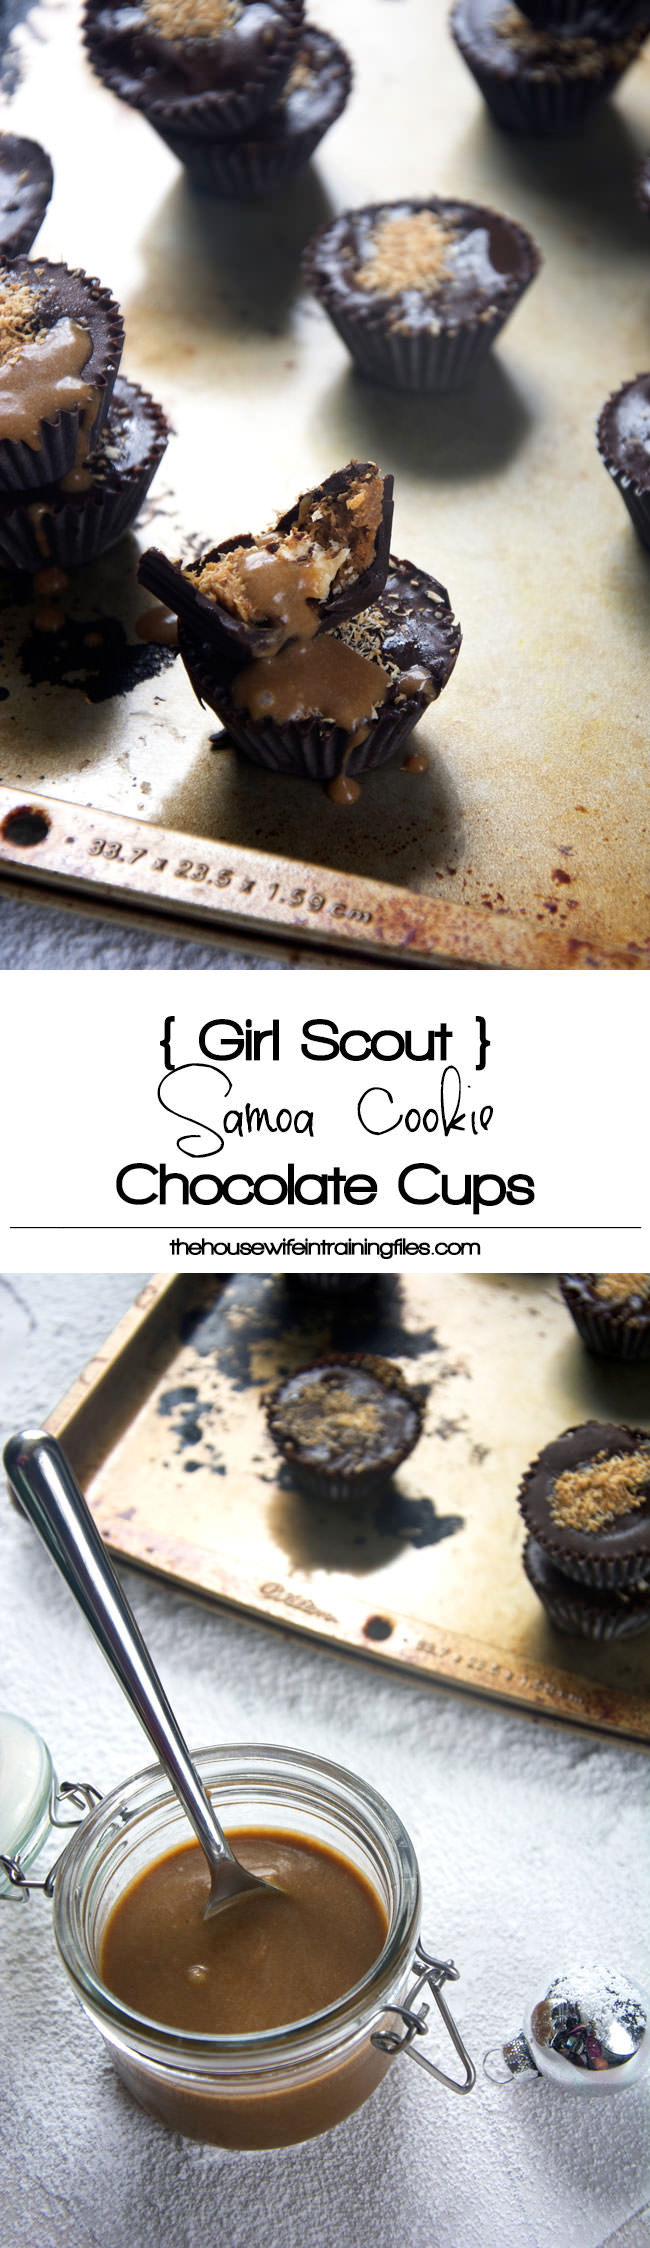 Your dessert table gets spruced up with these Girl Scout Samoa Cookie Chocolate Cups! All the flavors of your favorite girl scout cookie stuffed inside a chocolate cup! #girlscoutcookie #carameldelights #samoa #chocolatecups